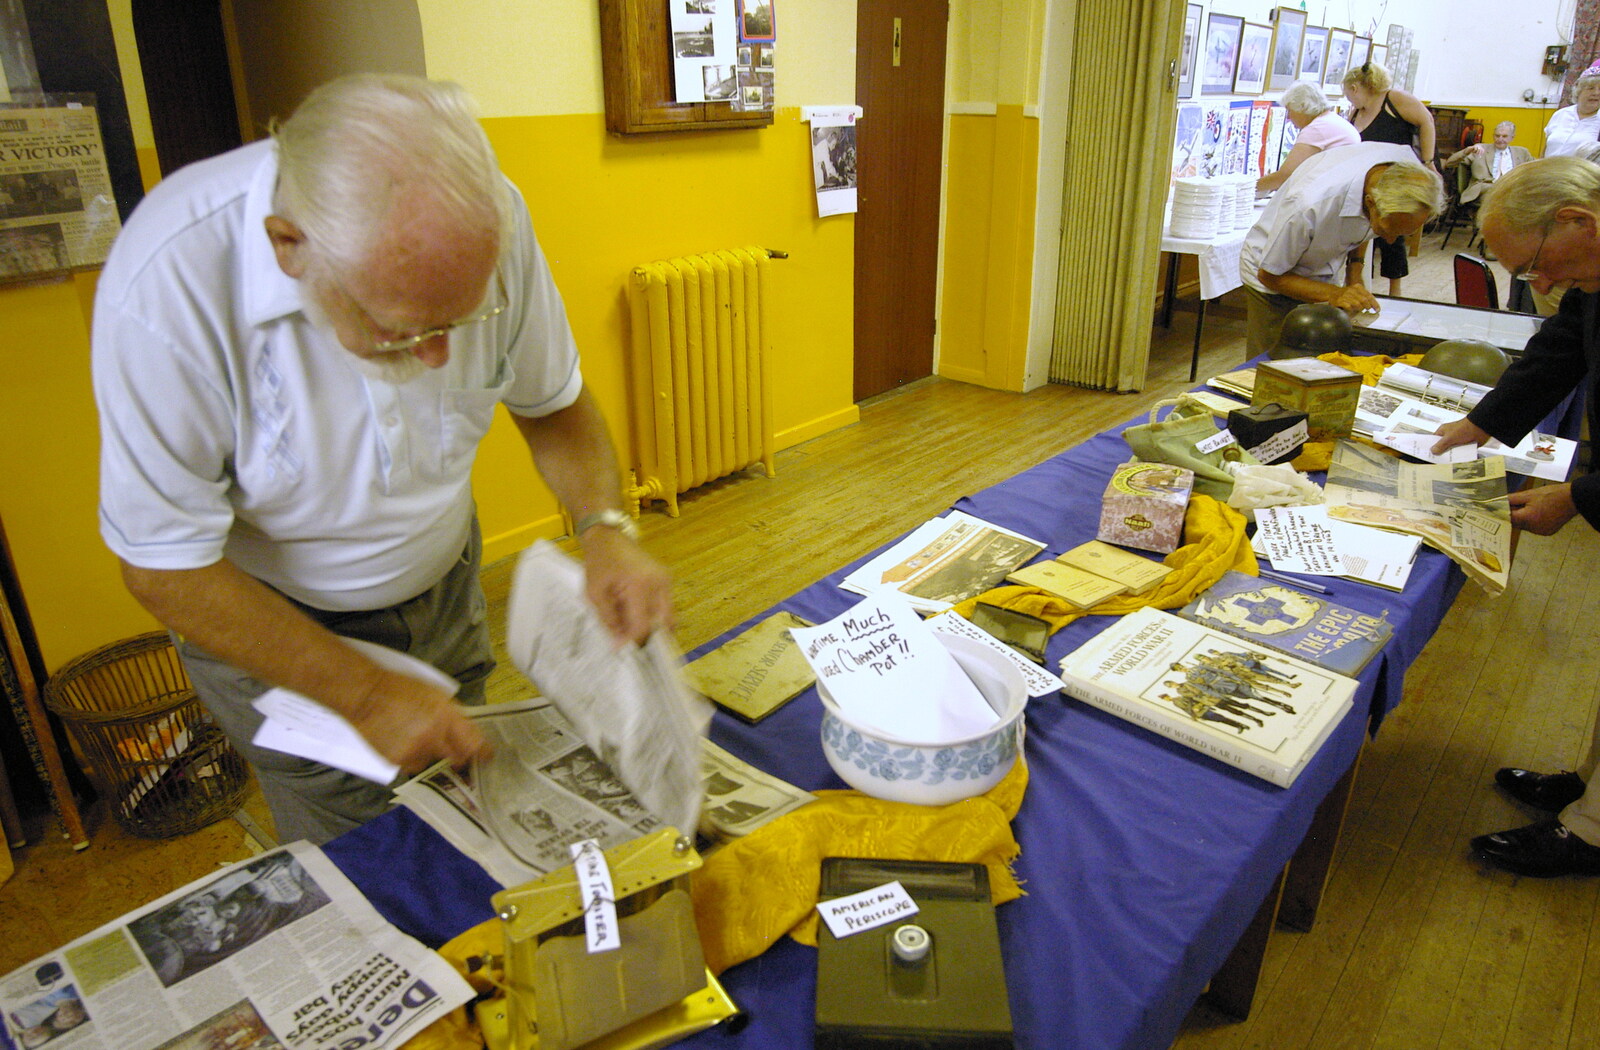 More history rummaging from Brome Village VE/VJ Celebrations, The Village Hall, Brome, Suffolk  - 4th September 2005